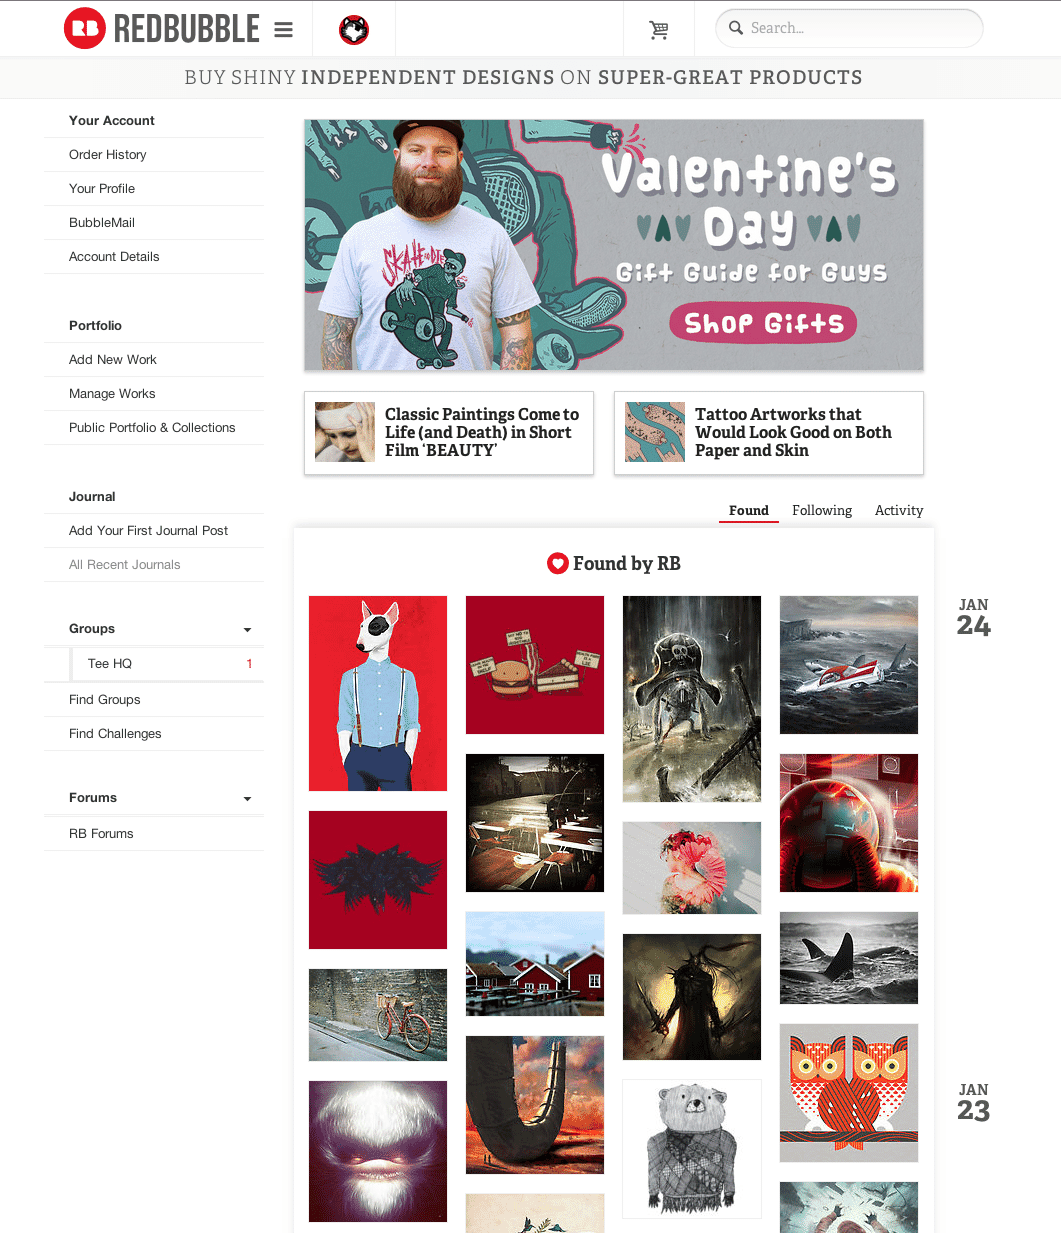 My Crowberus illustration featured on redbubble.com